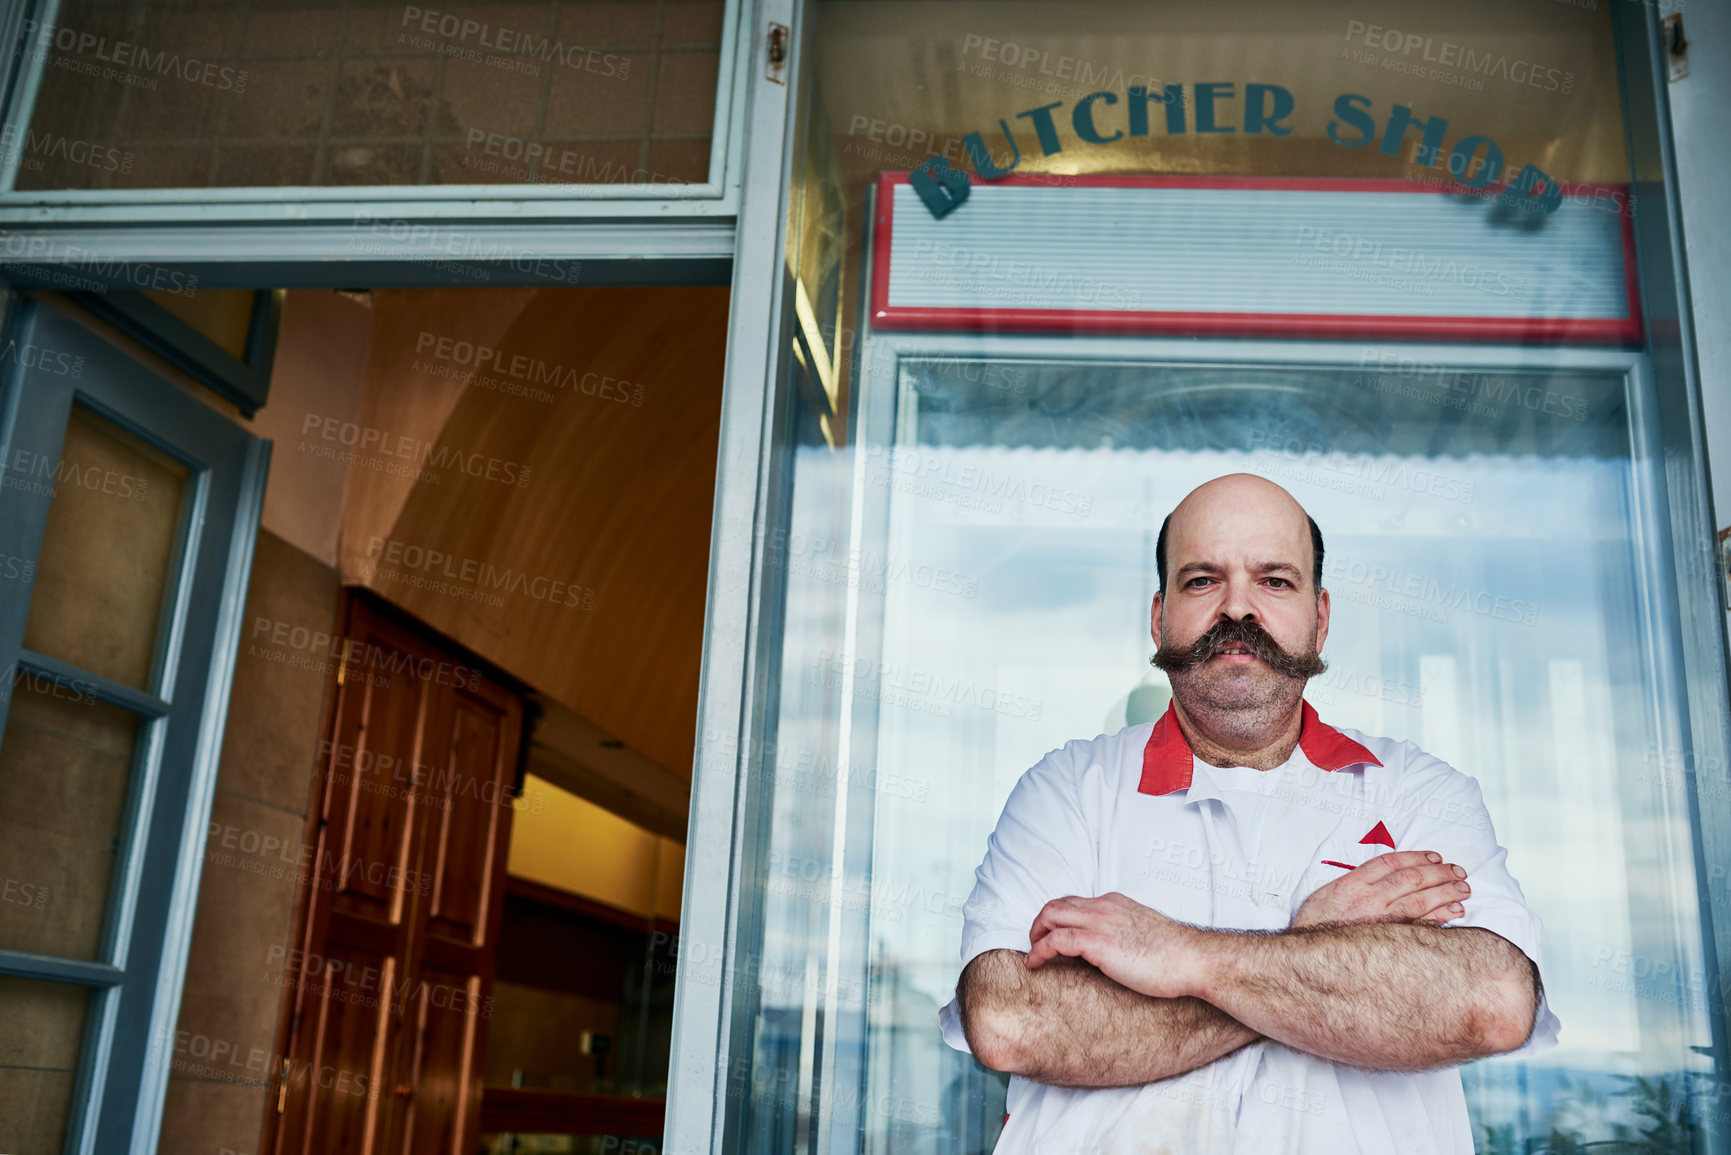 Buy stock photo Shot of a butcher at his store